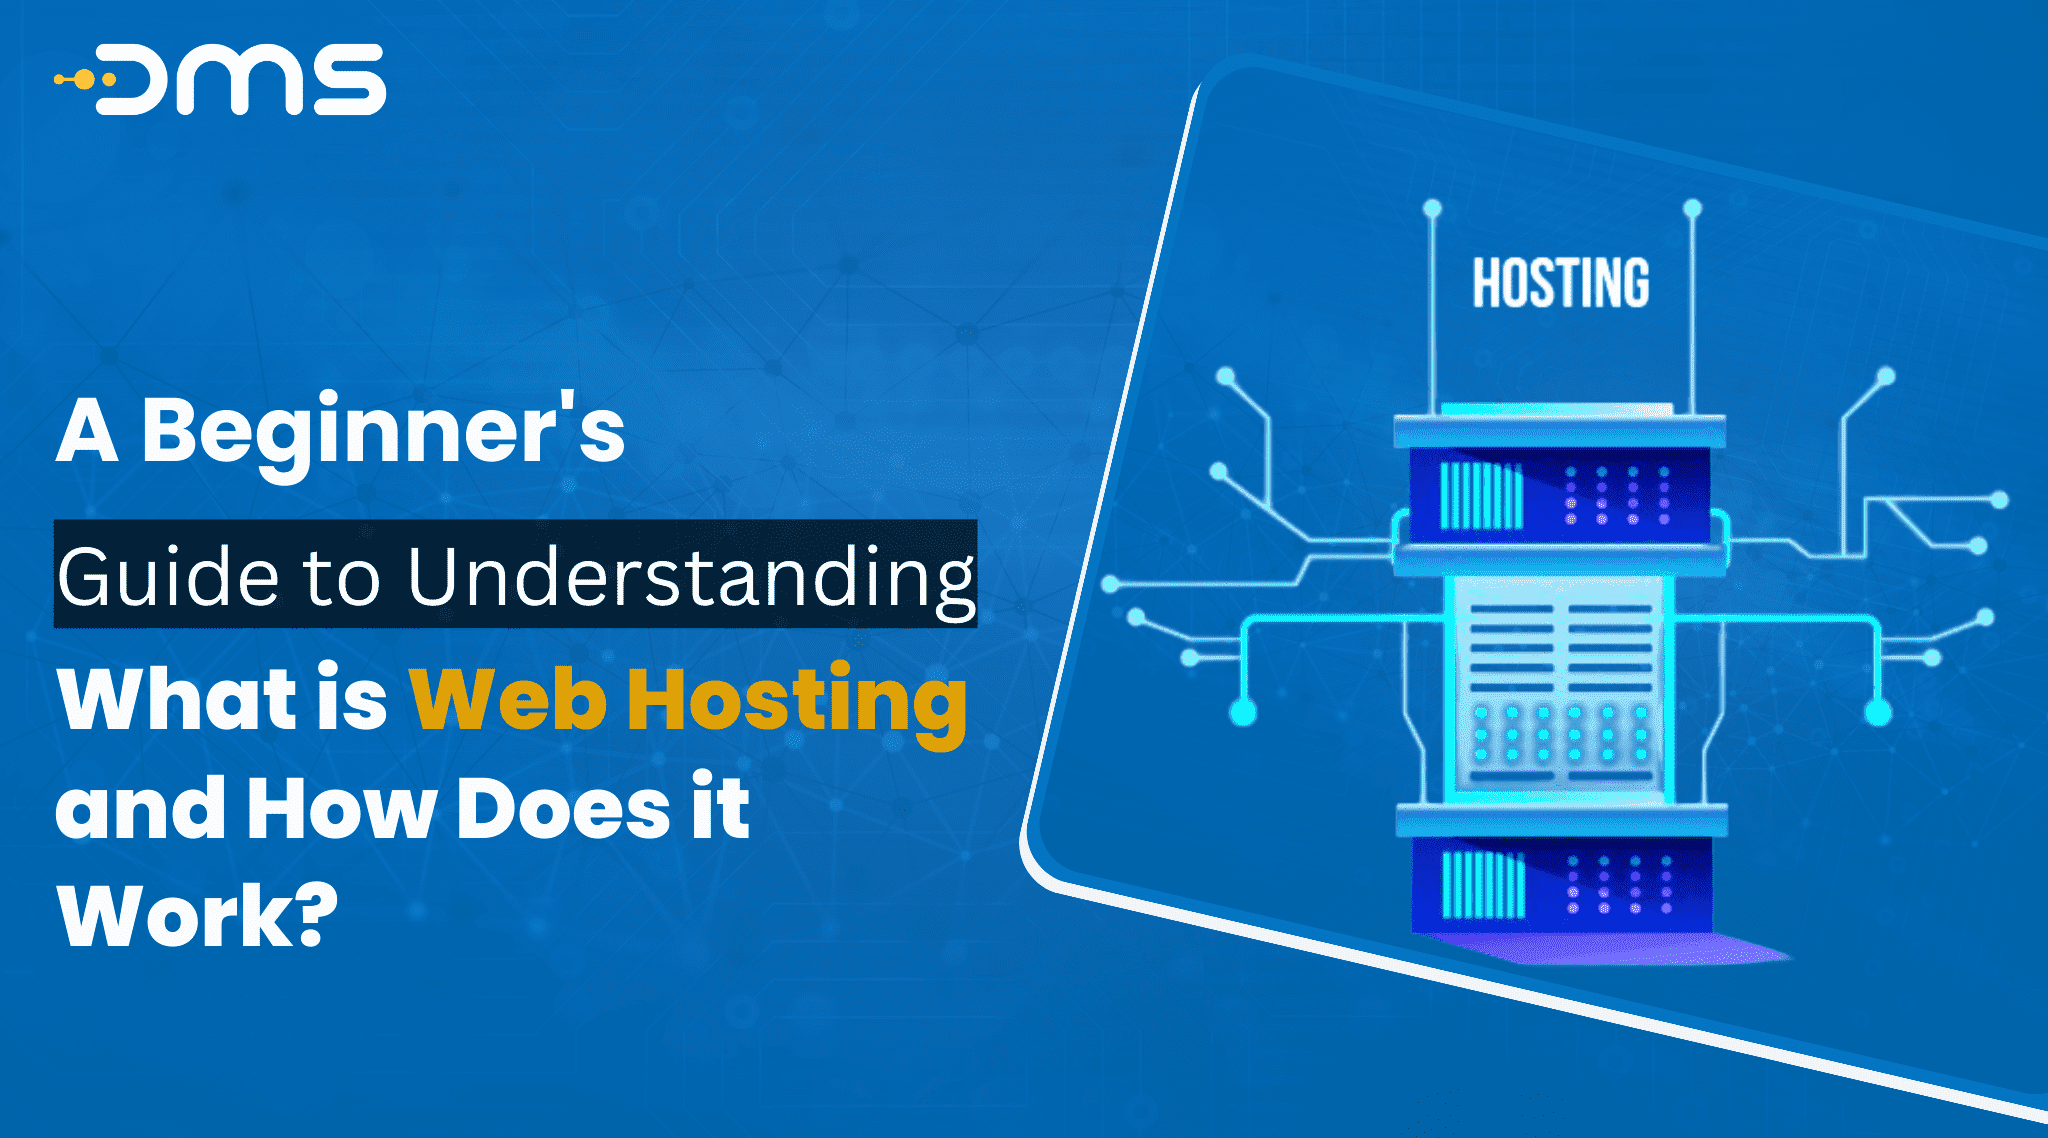 A Beginner's Guide to Understanding: What is Web Hosting and How Does it Work?